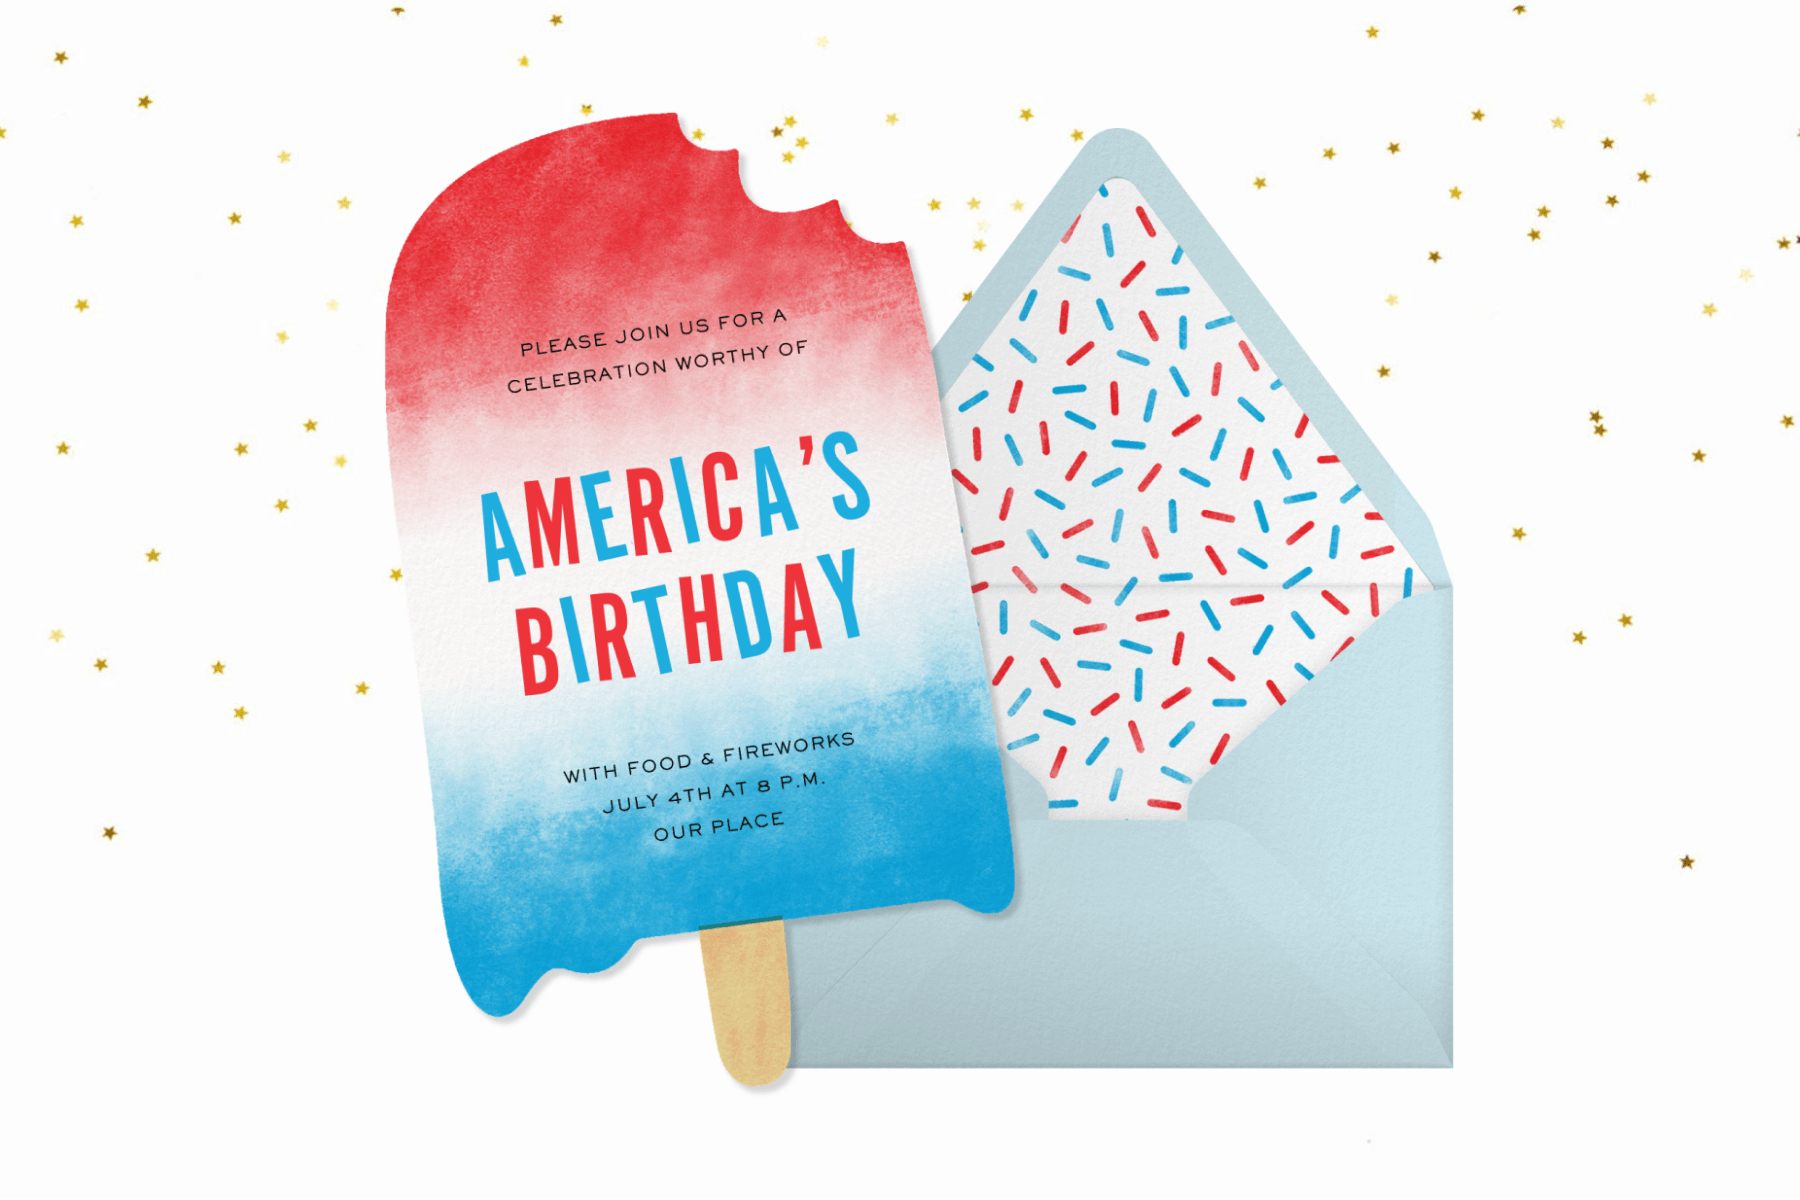 An invitation shaped like a red, white, and blue popsicle with a light blue envelope with sprinkles liner.